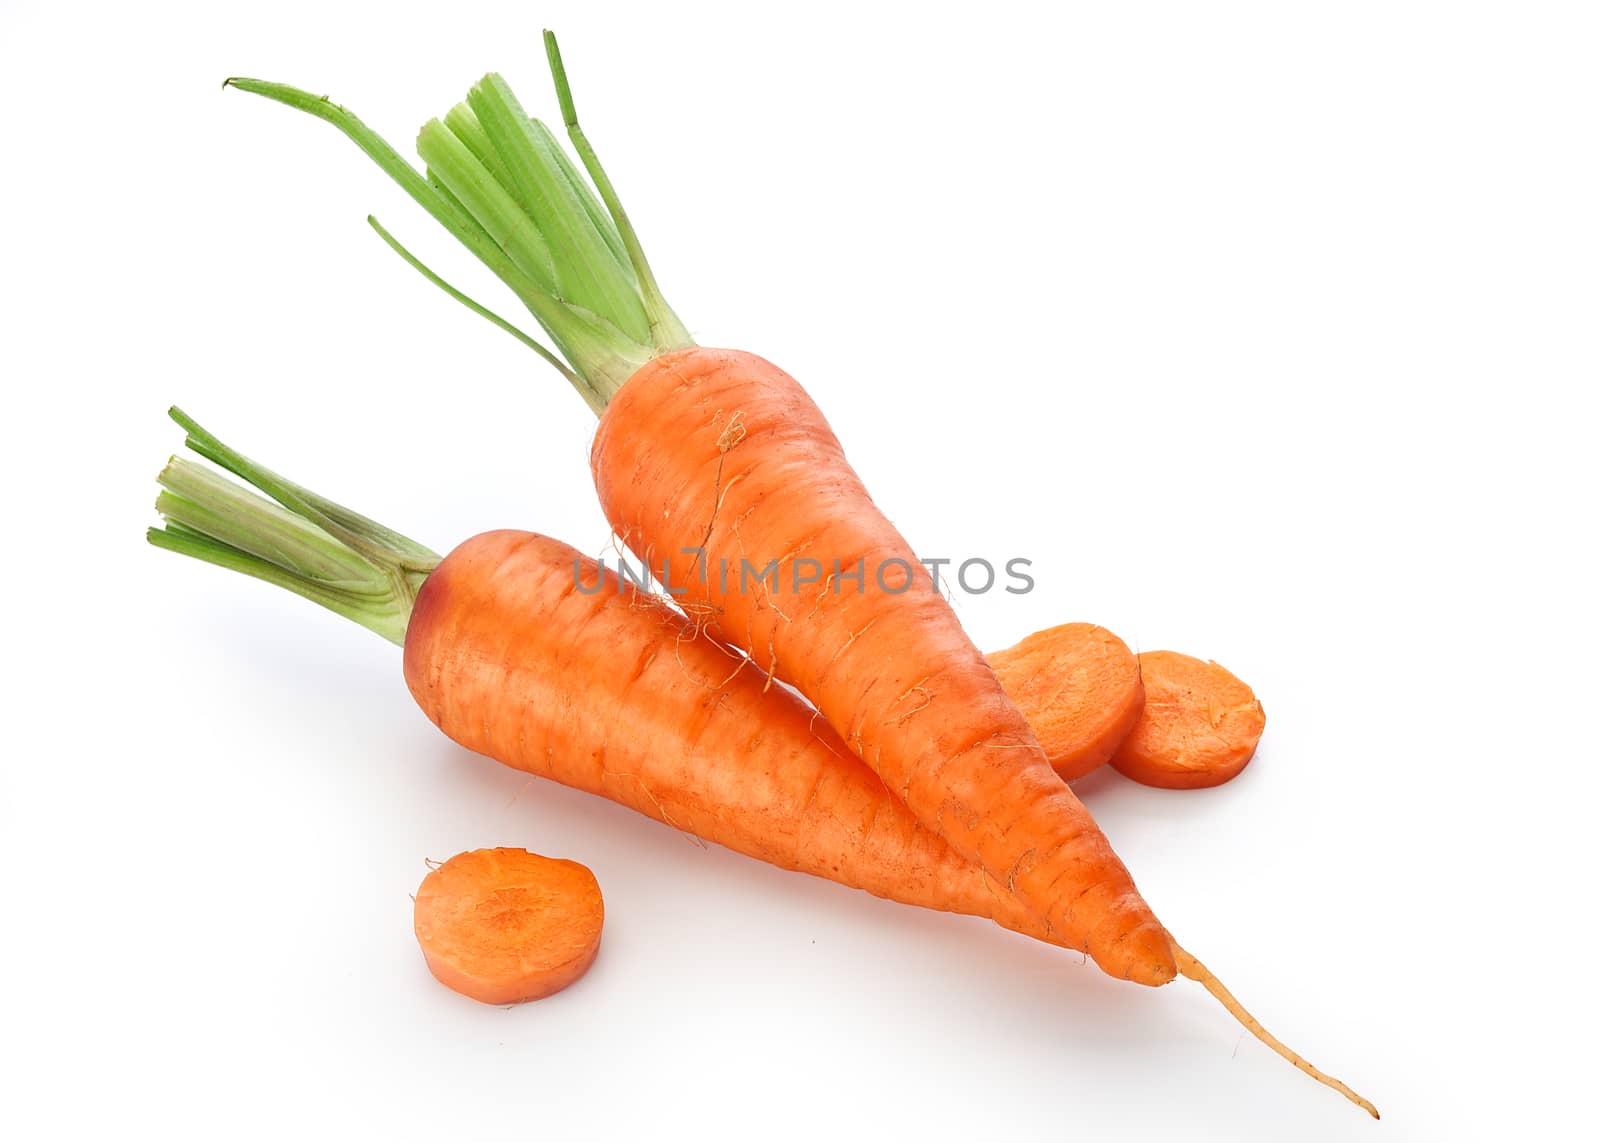 Isolated two fresh whole raw carrots with slices of carrot on the white background